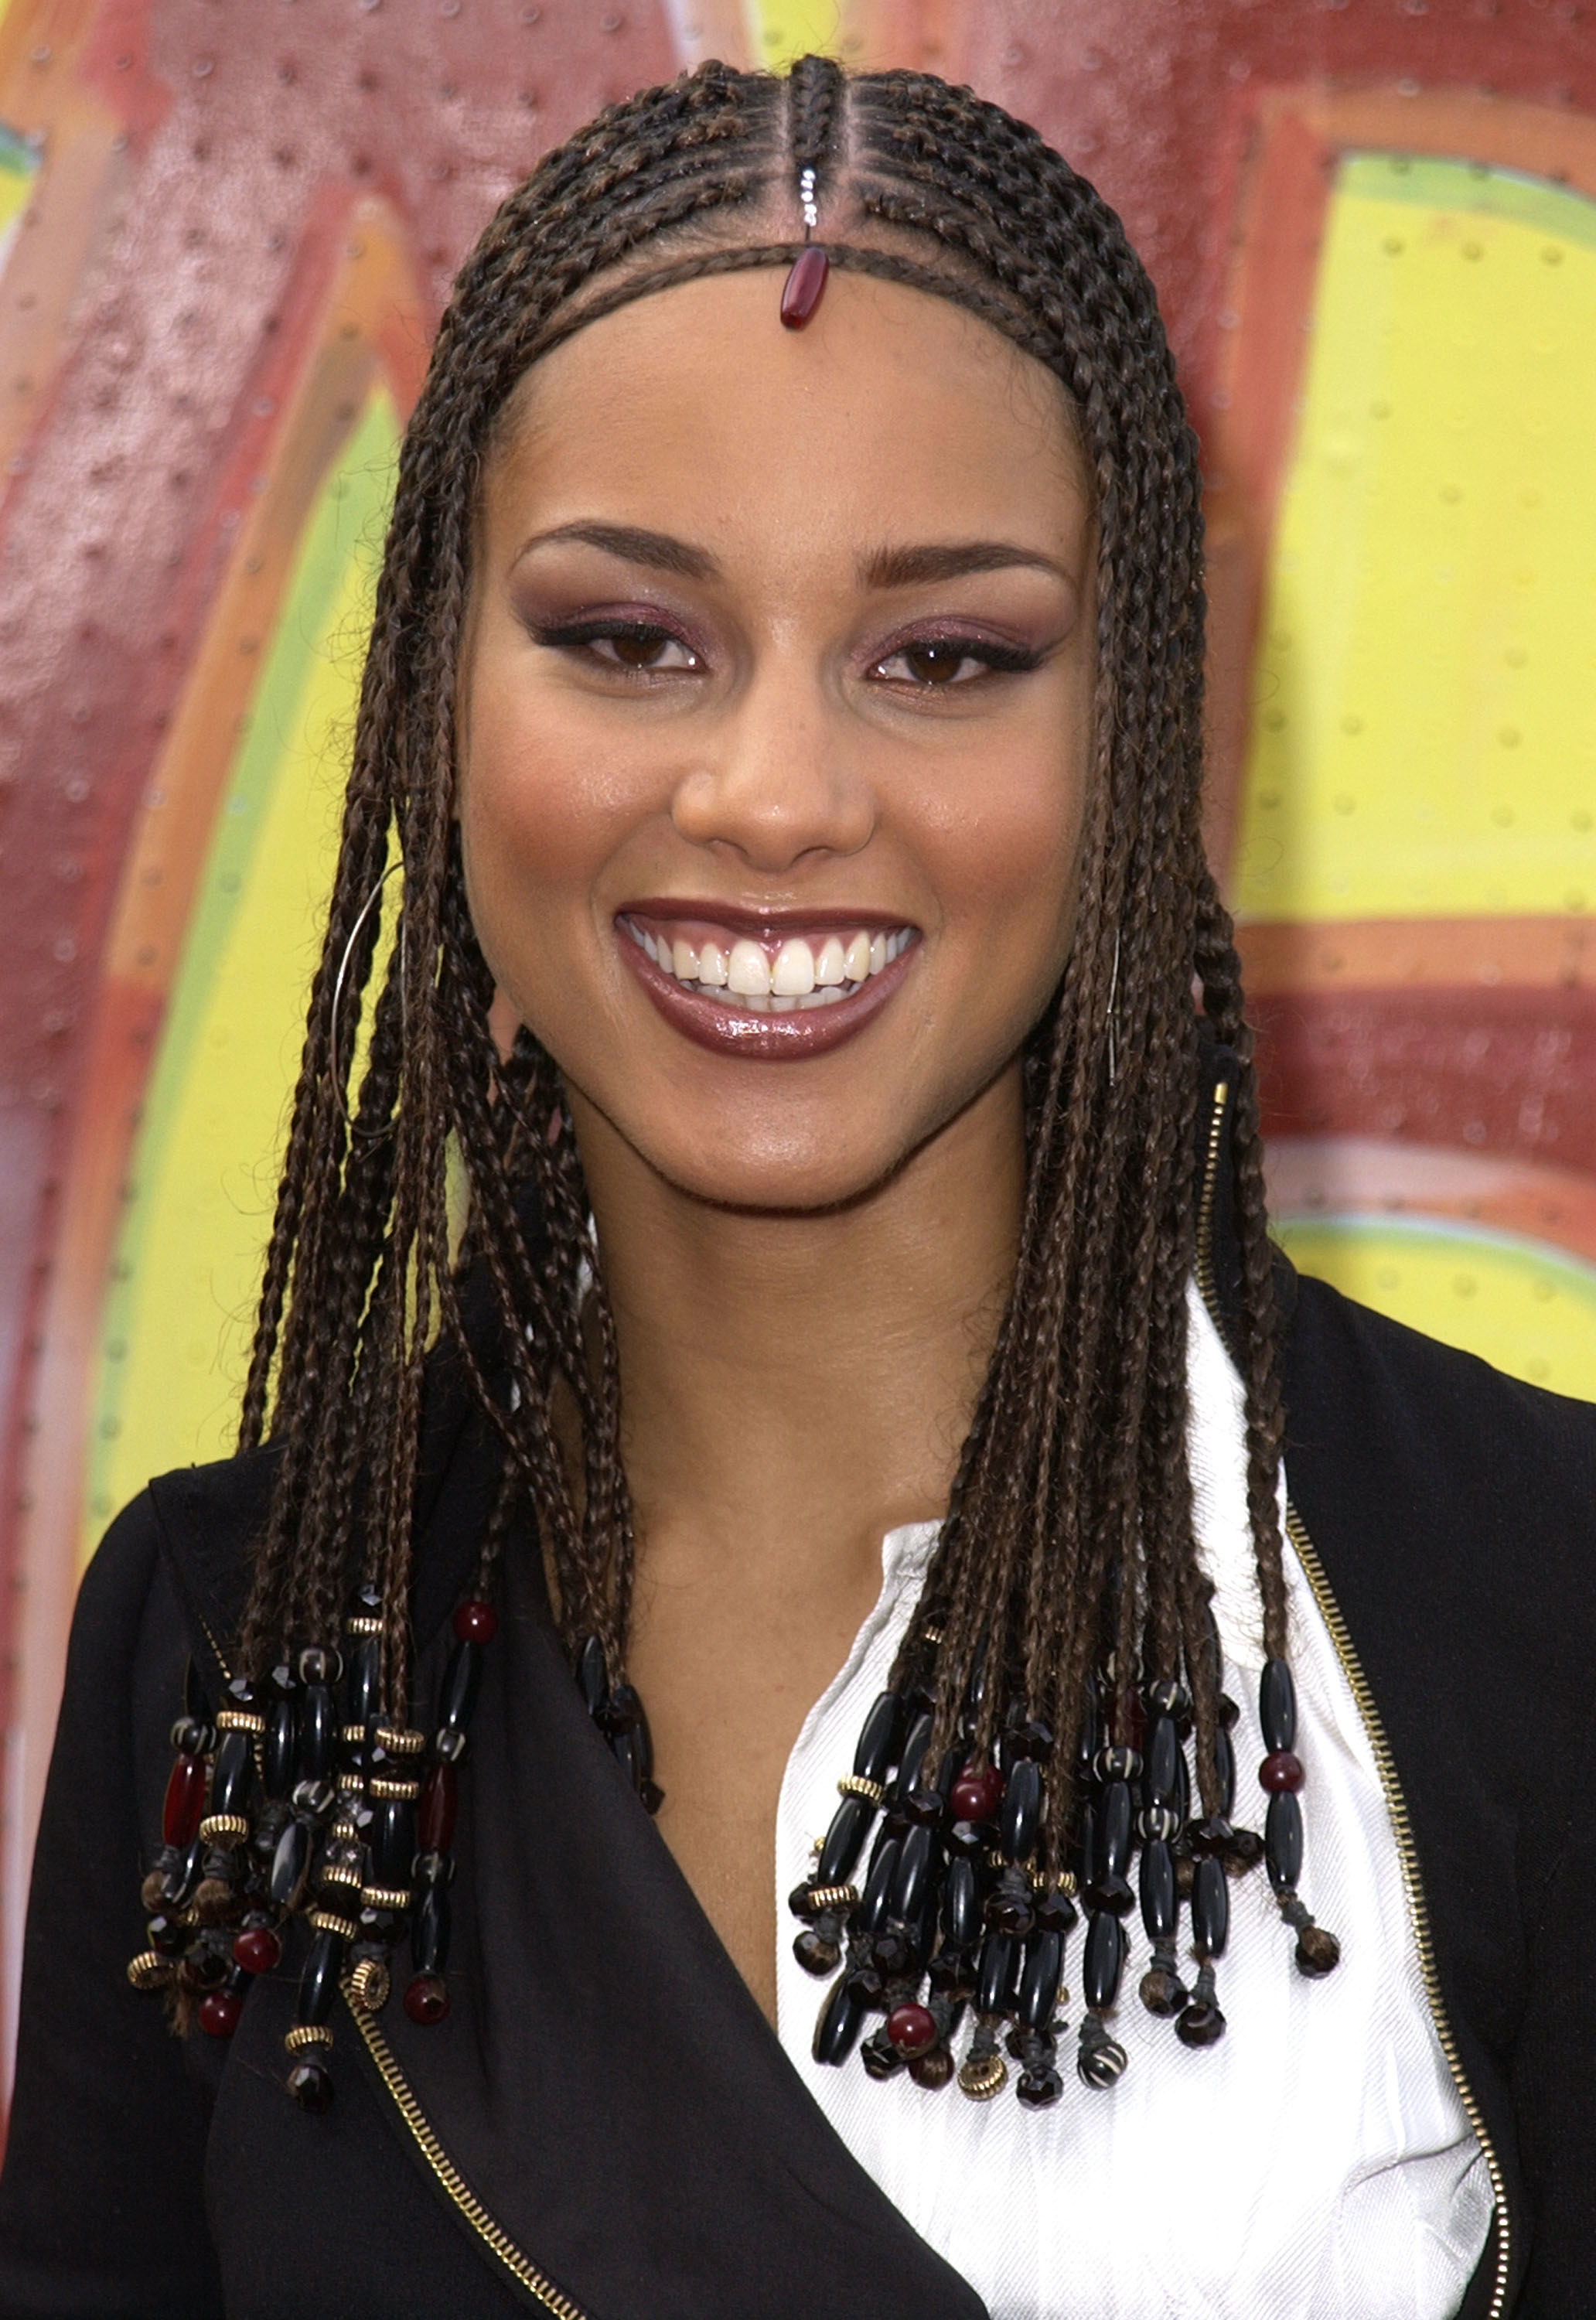 Keys at the Soul Train Lady of Soul Awards in 2001